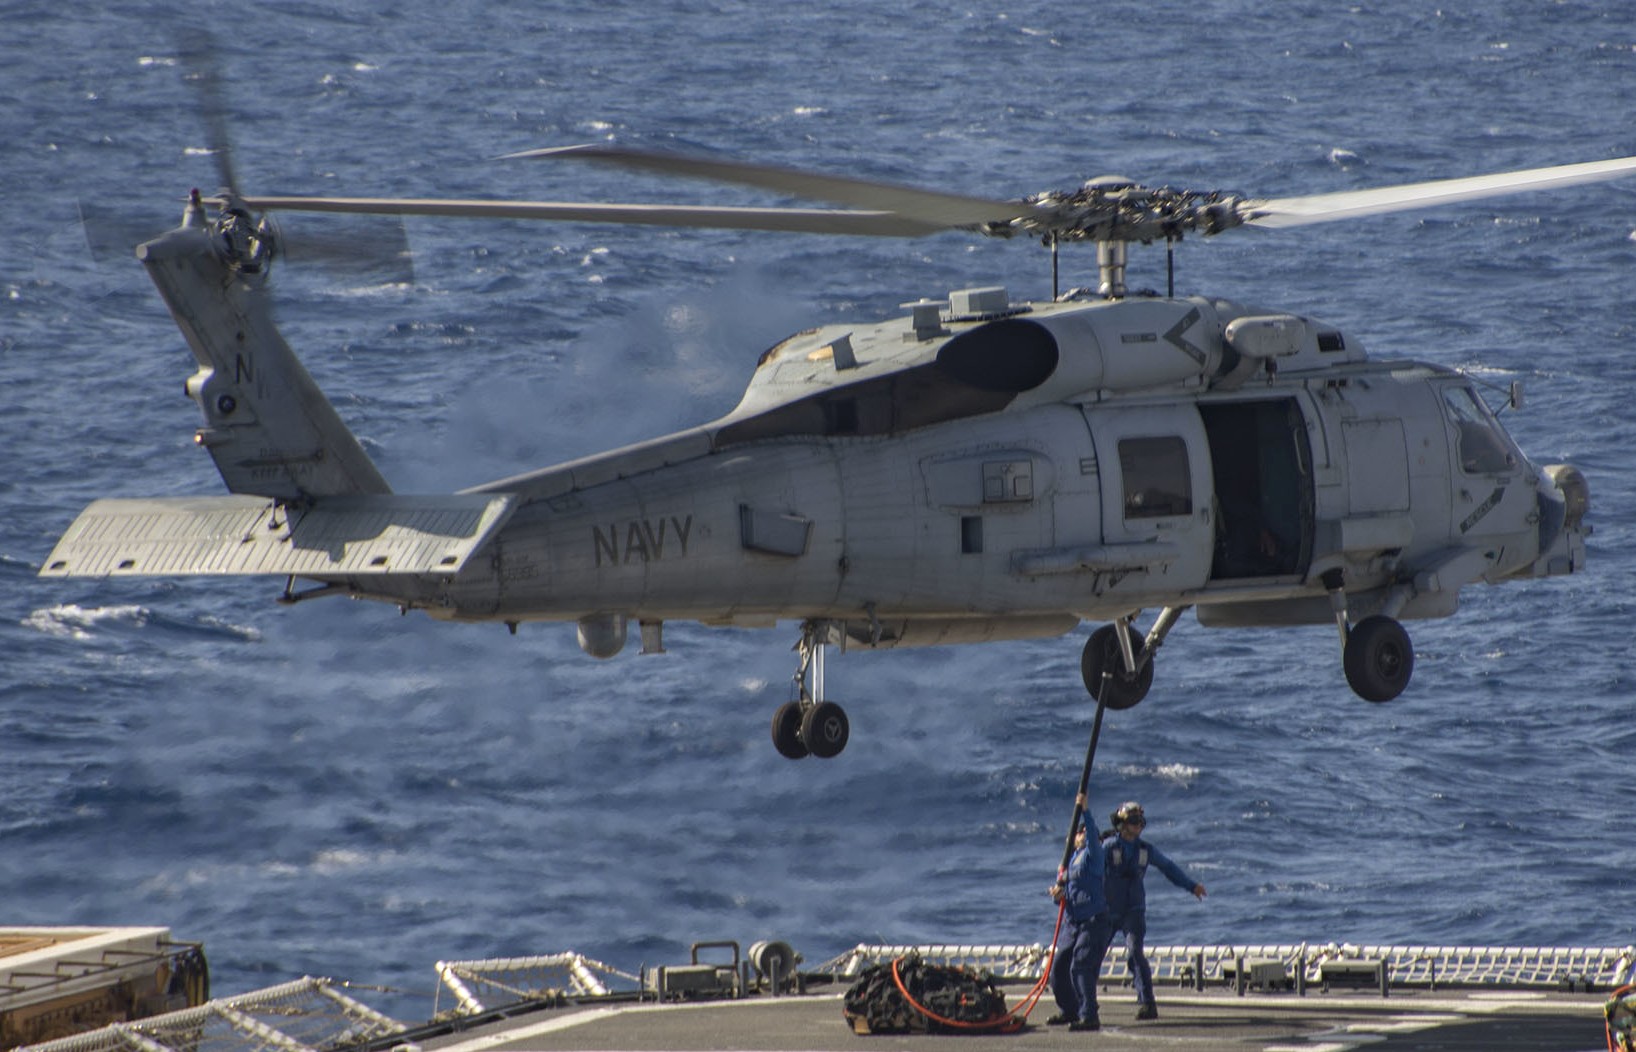 hsm-60 jaguars helicopter maritime strike squadron navy mh-60r seahawk 2016 06